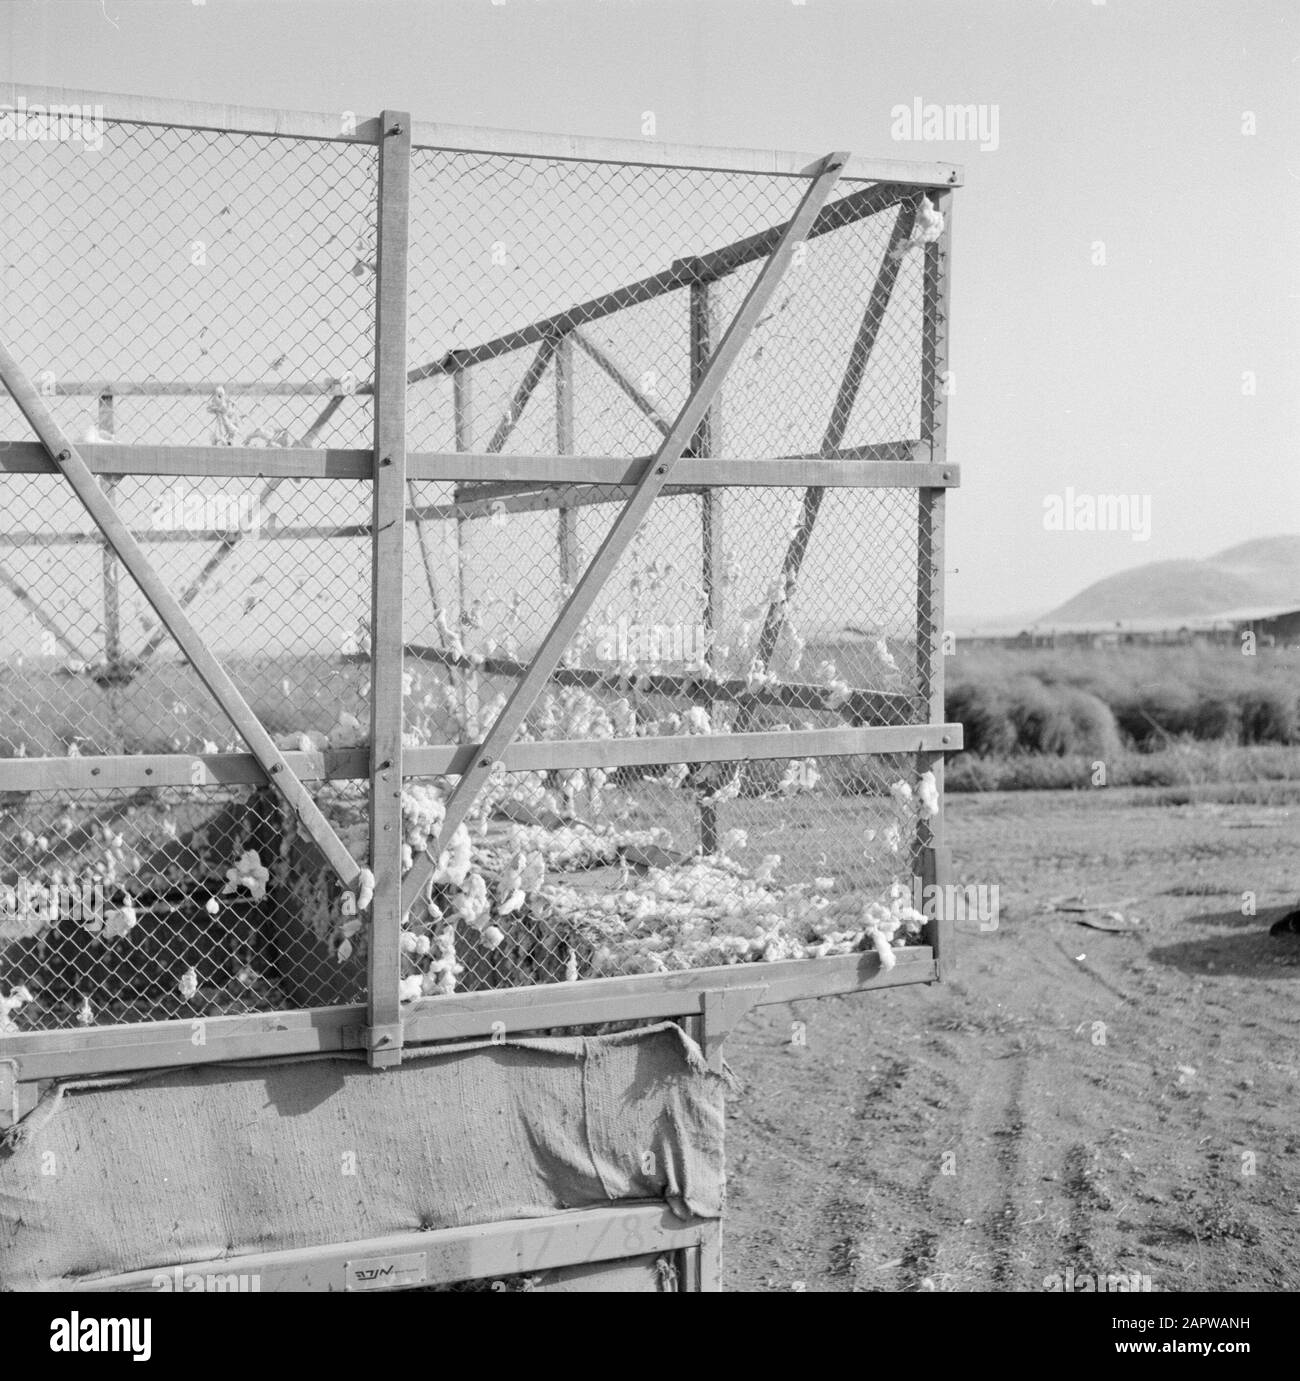 Israel: Huleh  Agricultural machine for the cotton harvest Date: undated Location: Huleh, Israel Keywords: arable, cotton, machines Stock Photo